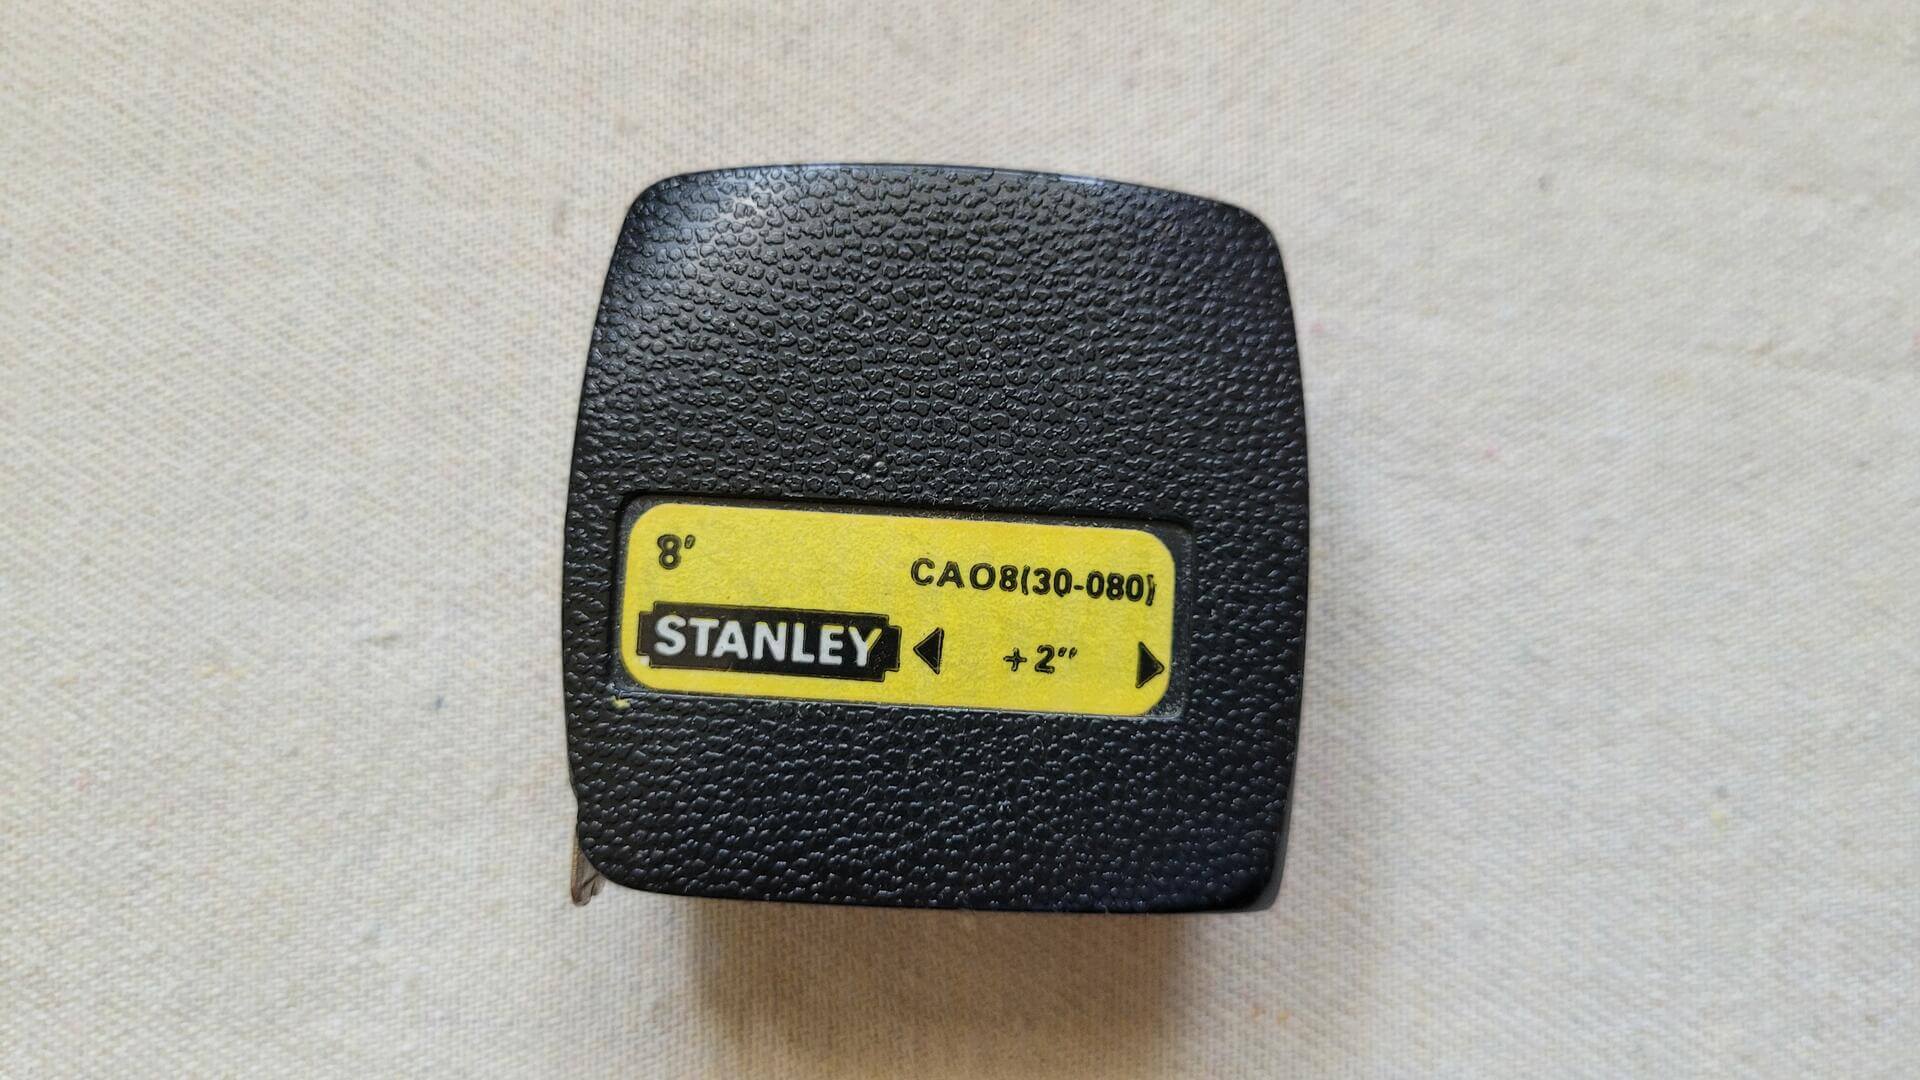 Rare vintage Stanley 8' Model CA08(30-080) black cololur life guard myler measuring tape with Du Pont Polyester Film - Antique collectible Stanley marking and measuring hand tools